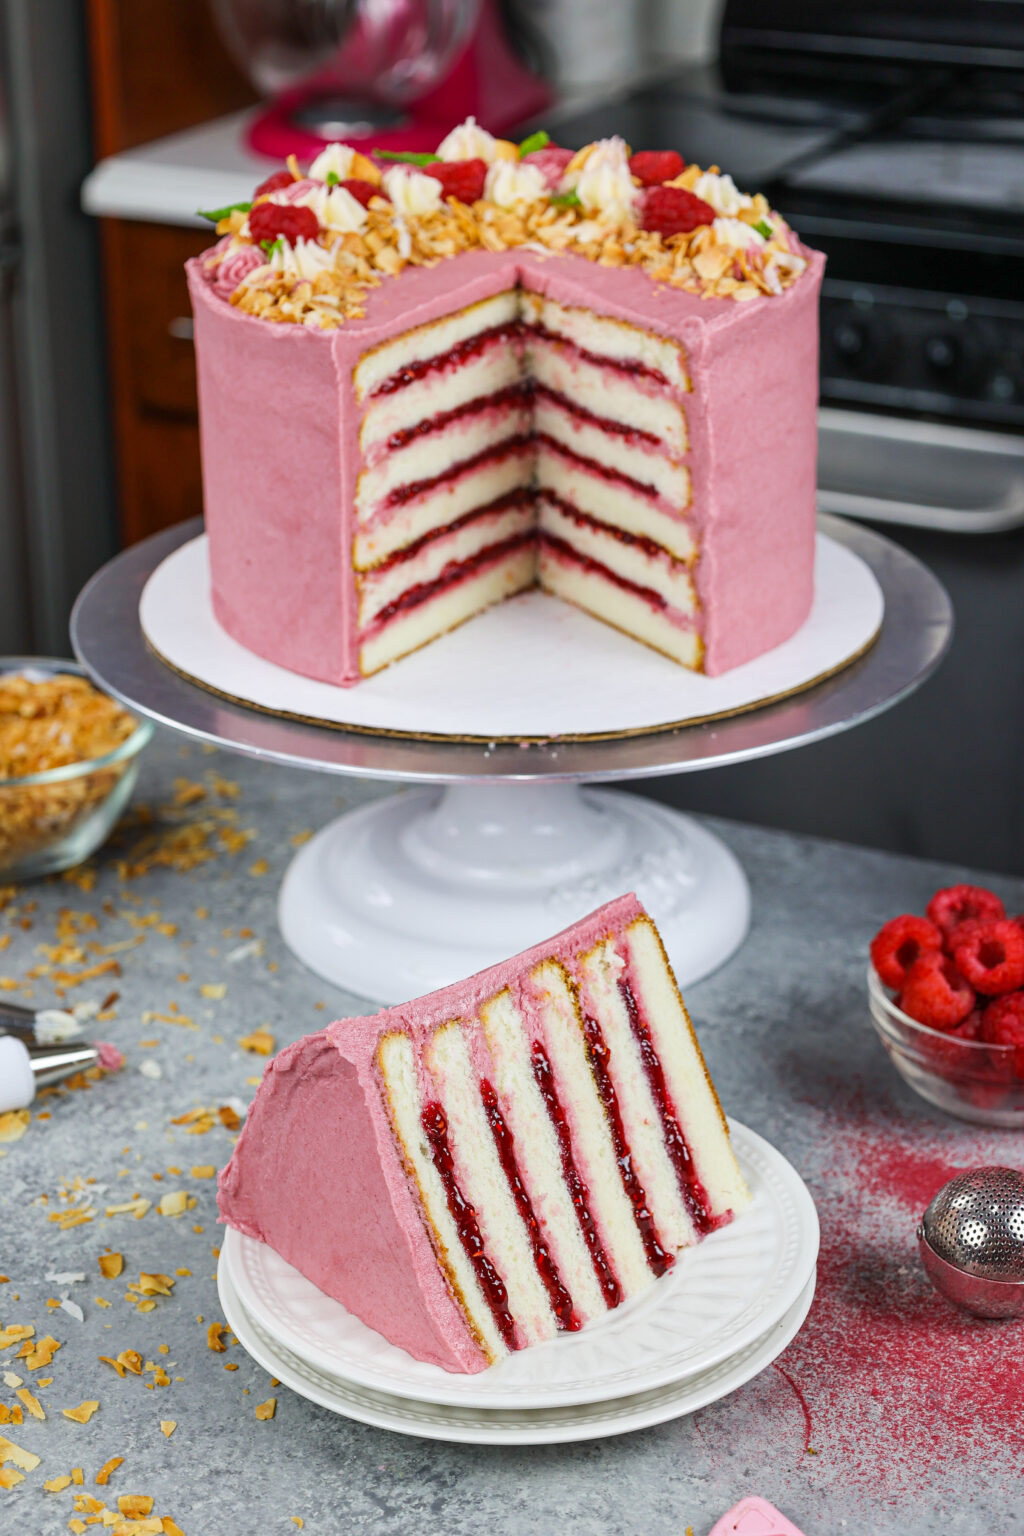 Raspberry and Coconut Cake - Fluffy Cake Layers w/ Raspberry Frosting